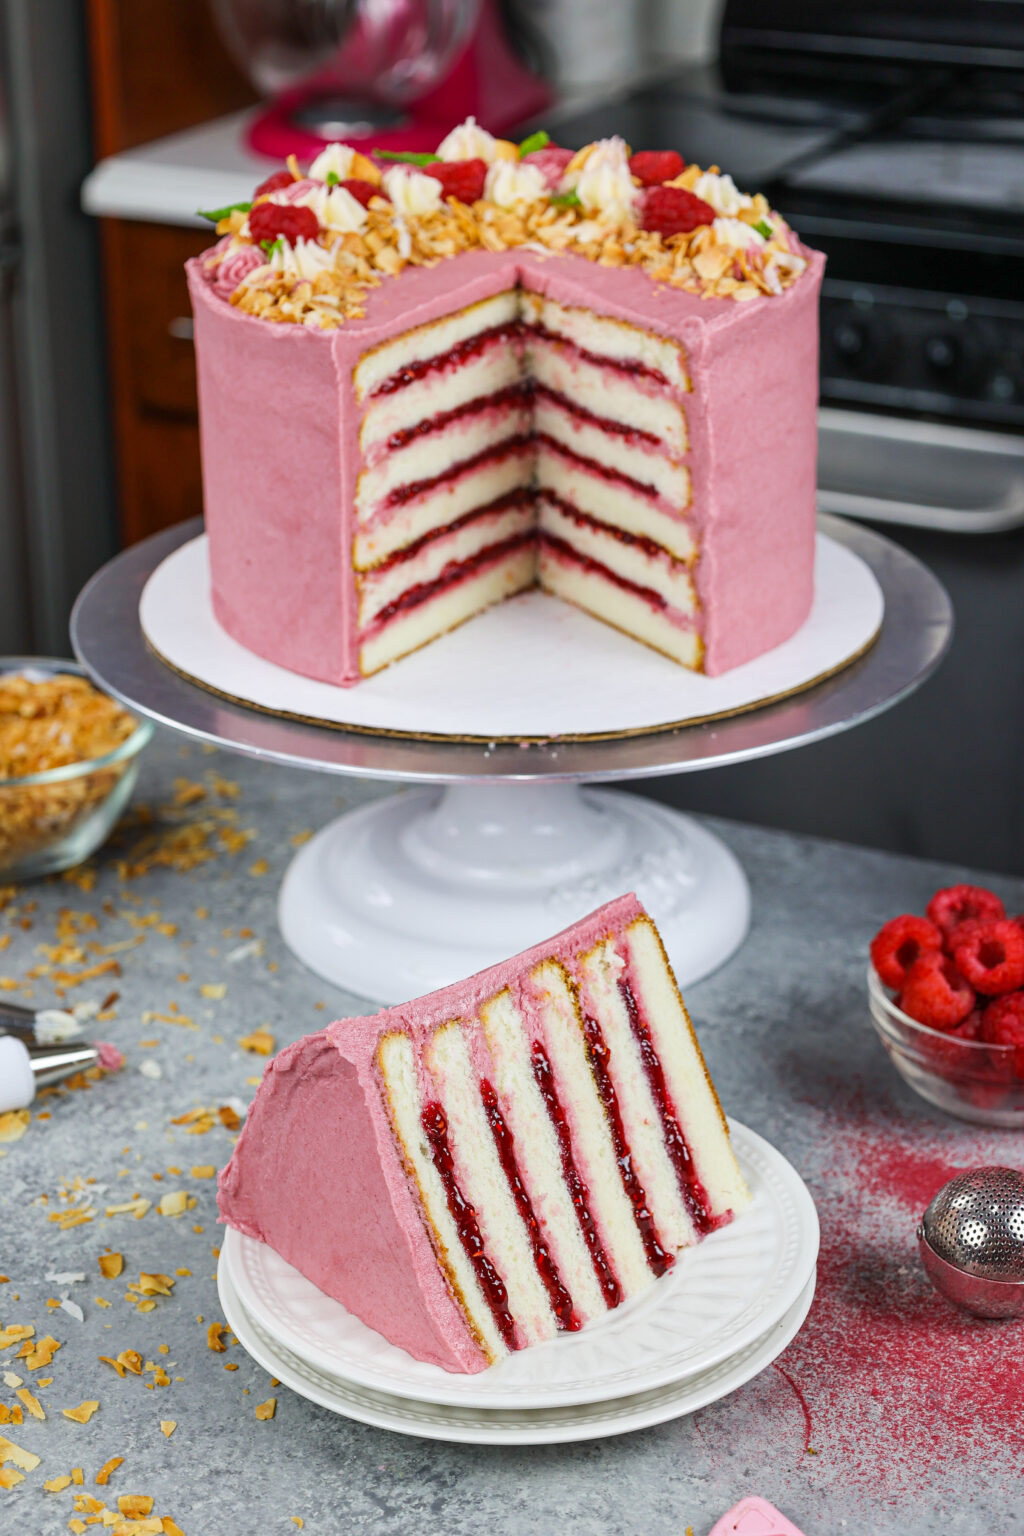 Raspberry and Coconut Cake - Fluffy Cake Layers w/ Raspberry Frosting